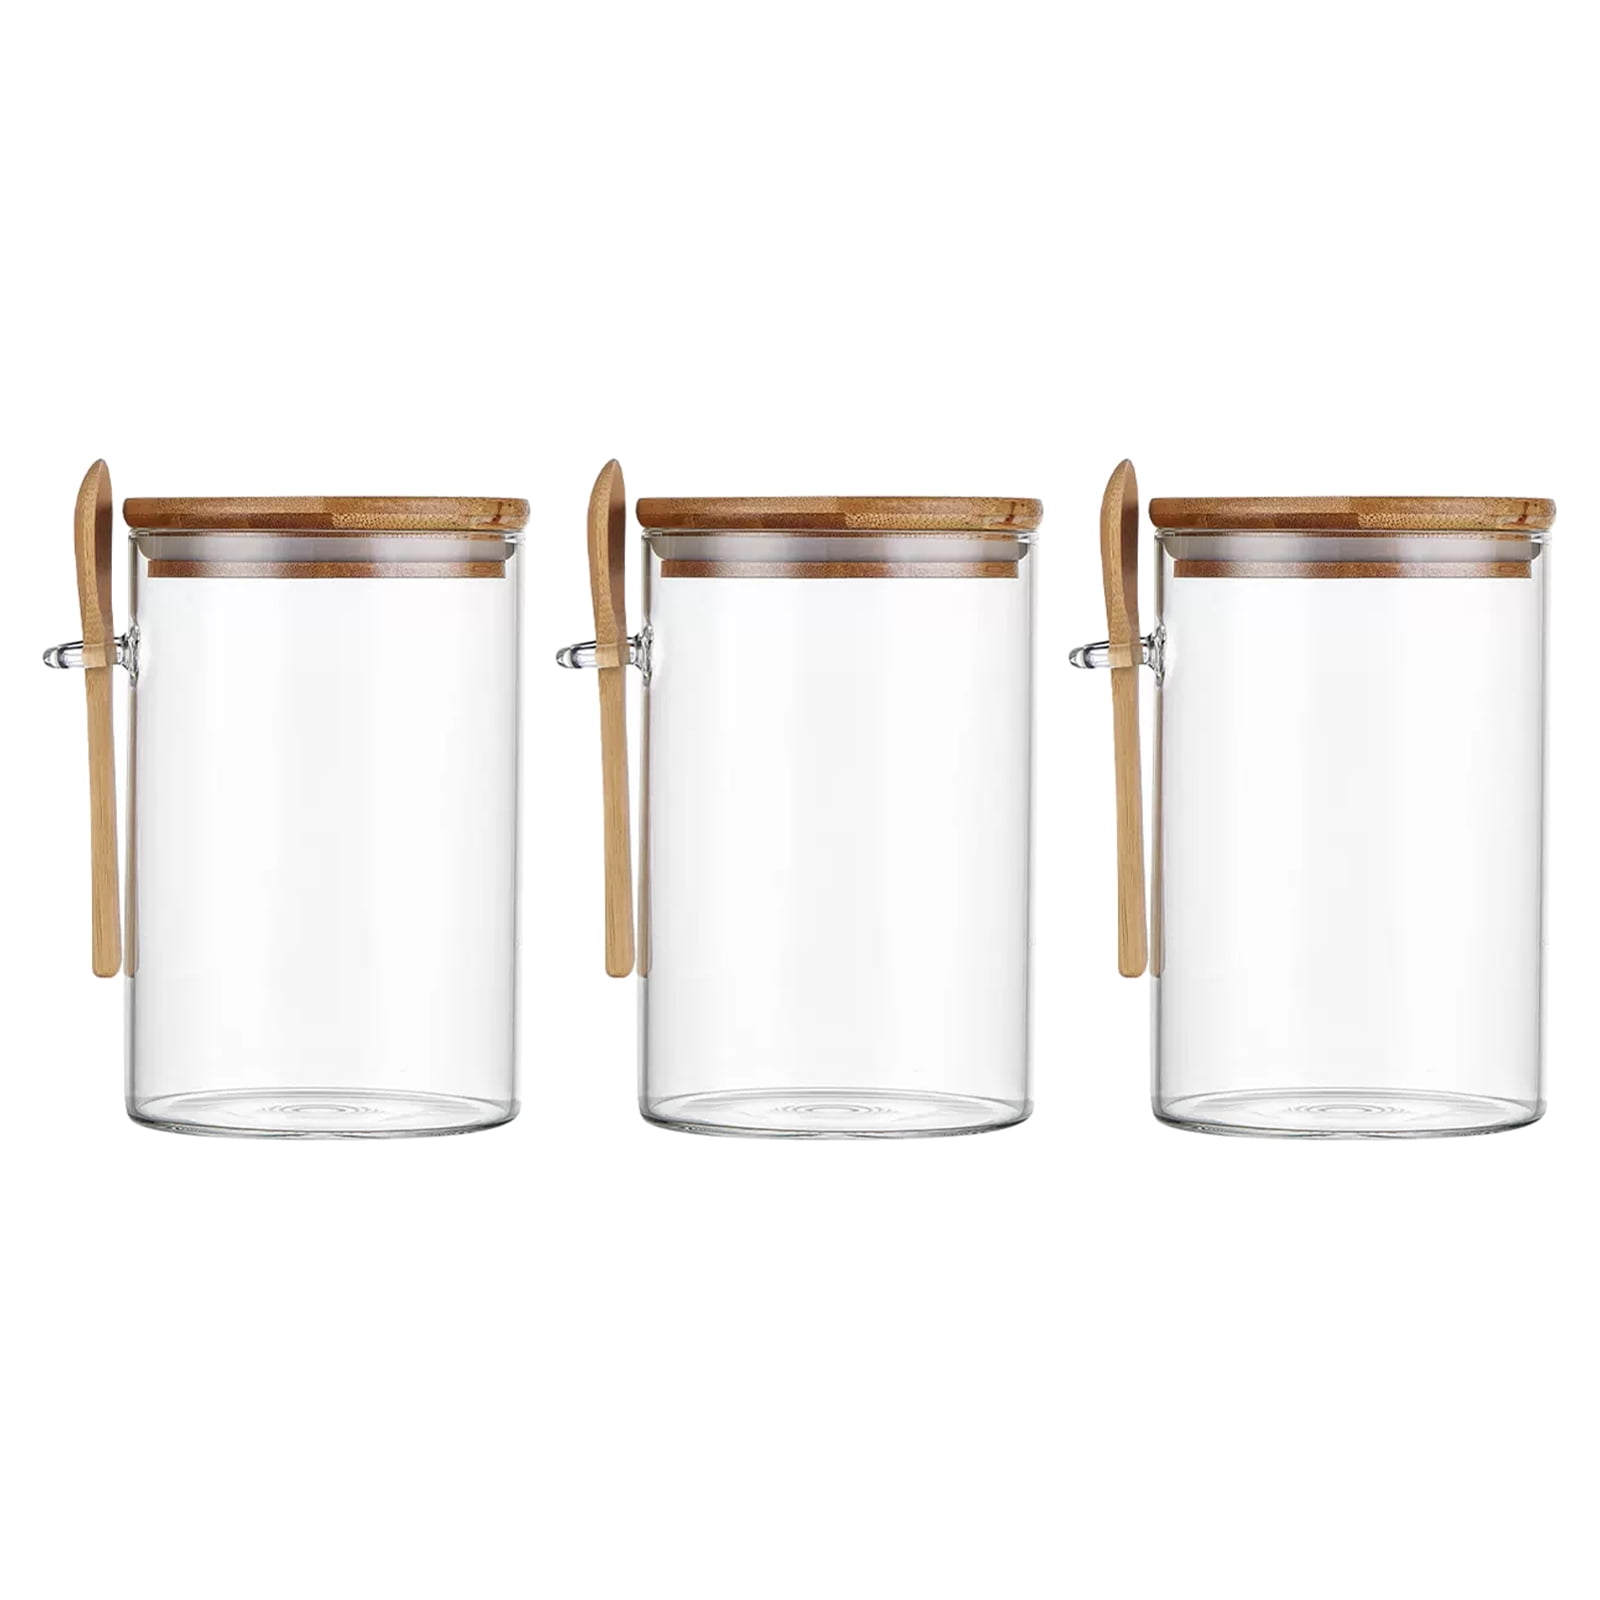 3 Pack Glass Jar with Bamboo Lids Glass Containers Sealed Glass Spice Jars  for Candy Coffee Beans Sugar Nuts Cookies 420ml 450ml